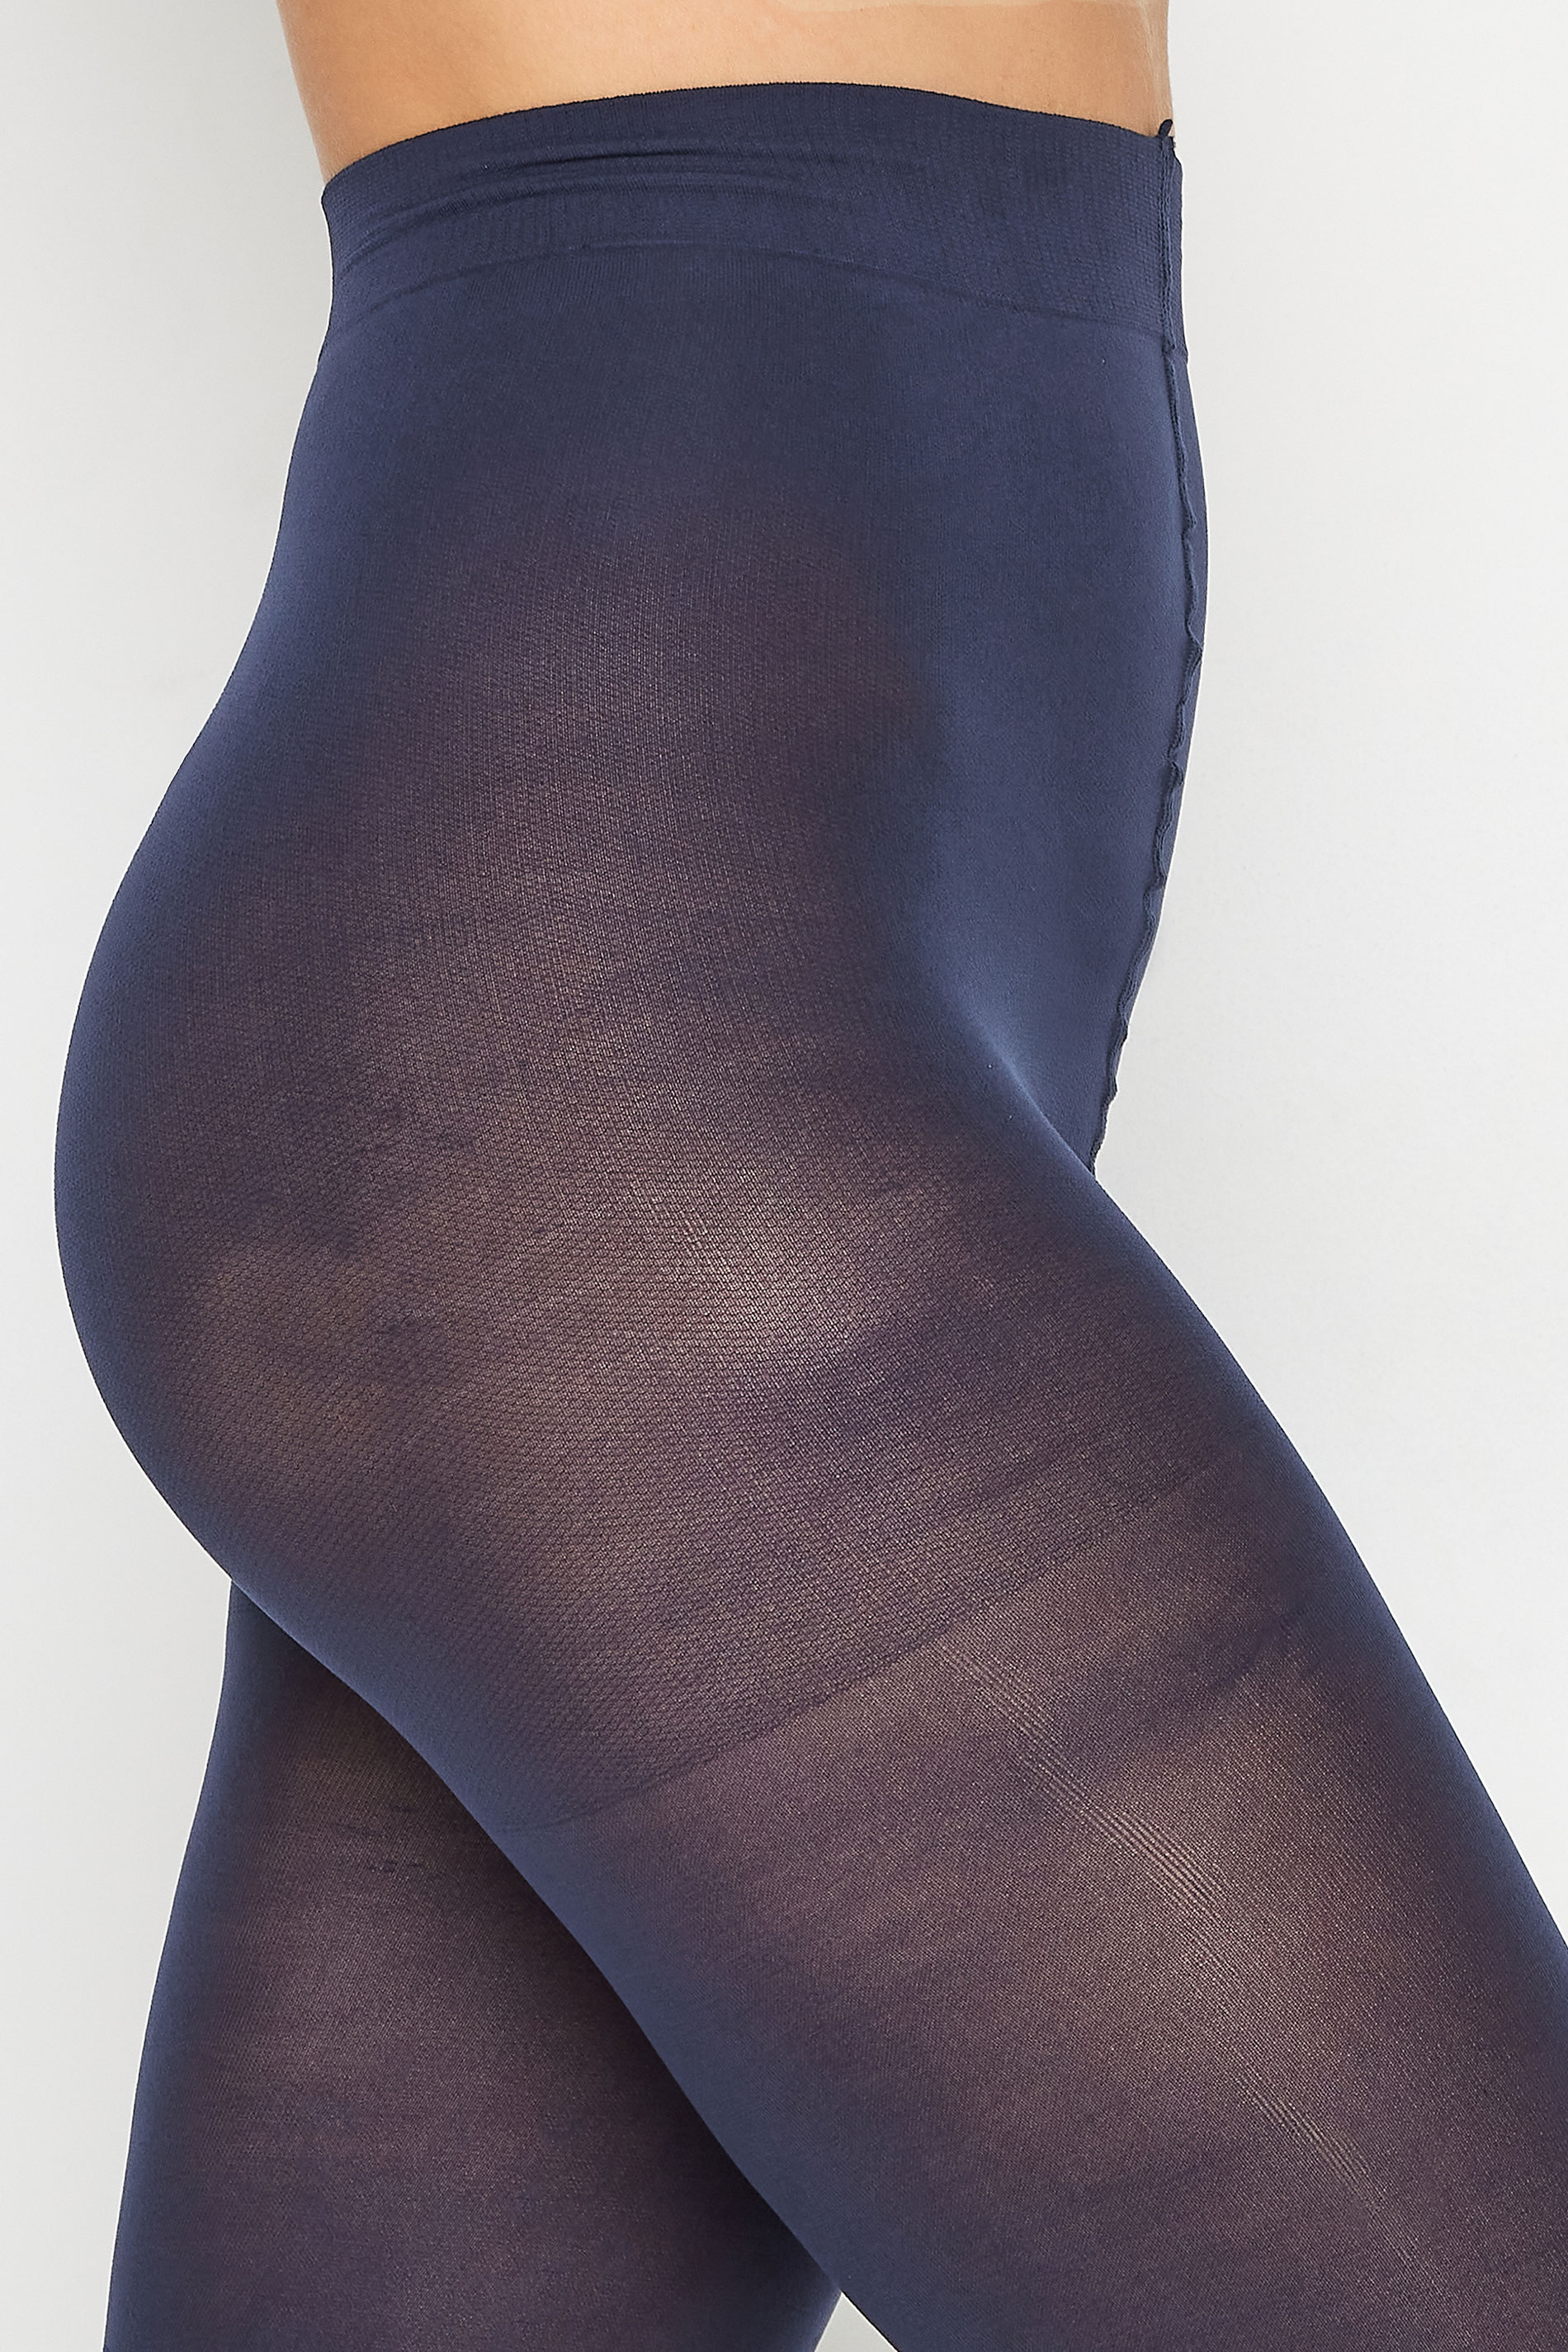 Albers 40 denier opaque tights - Navy Blue - CLEARANCE – The Big Bloomers  Company